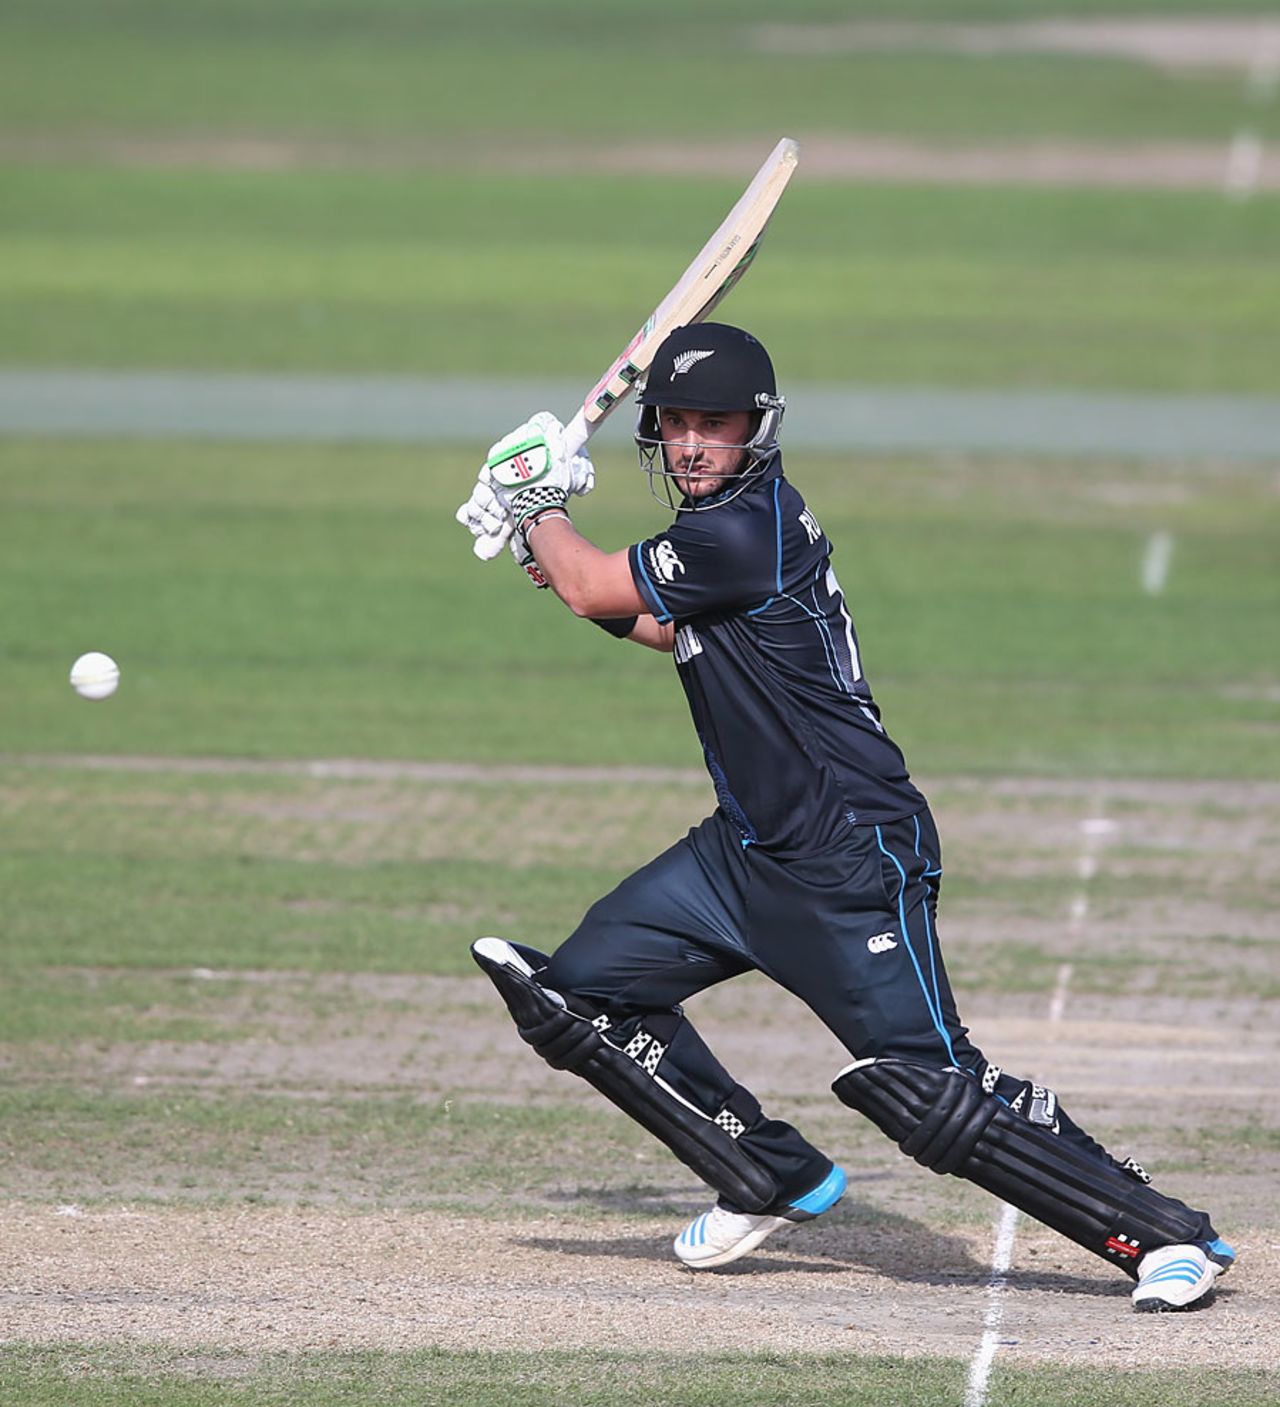 Hamish Rutherford dominated New Zealand A's chase, England Lions v New Zealand A, Tri-series, New Road, August 12, 2014